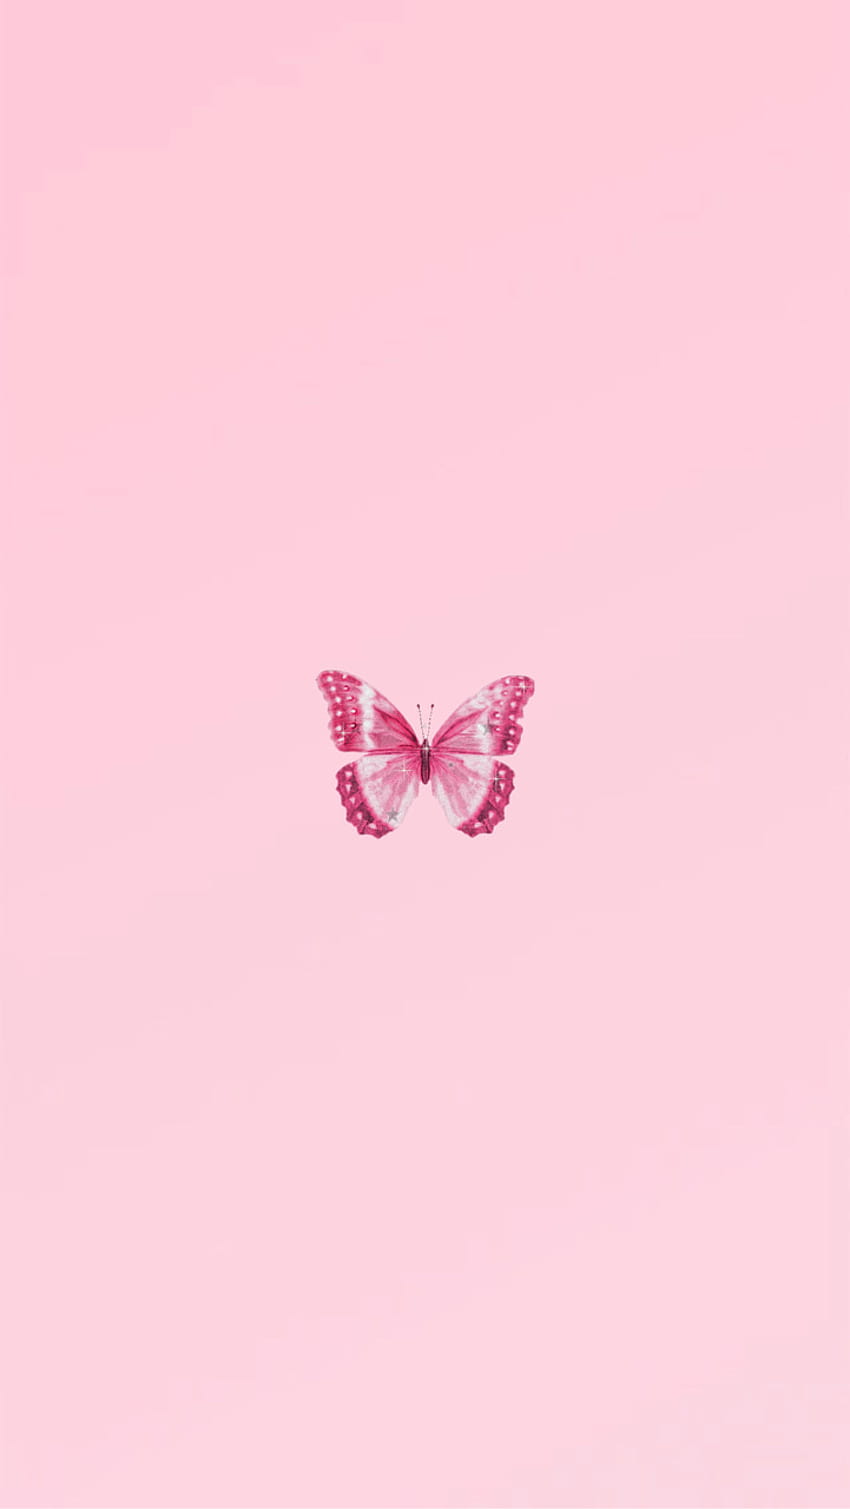 Cute Pink Butterfly Light Effect Colorful Butterfly Background Wallpaper  Image For Free Download  Pngtree